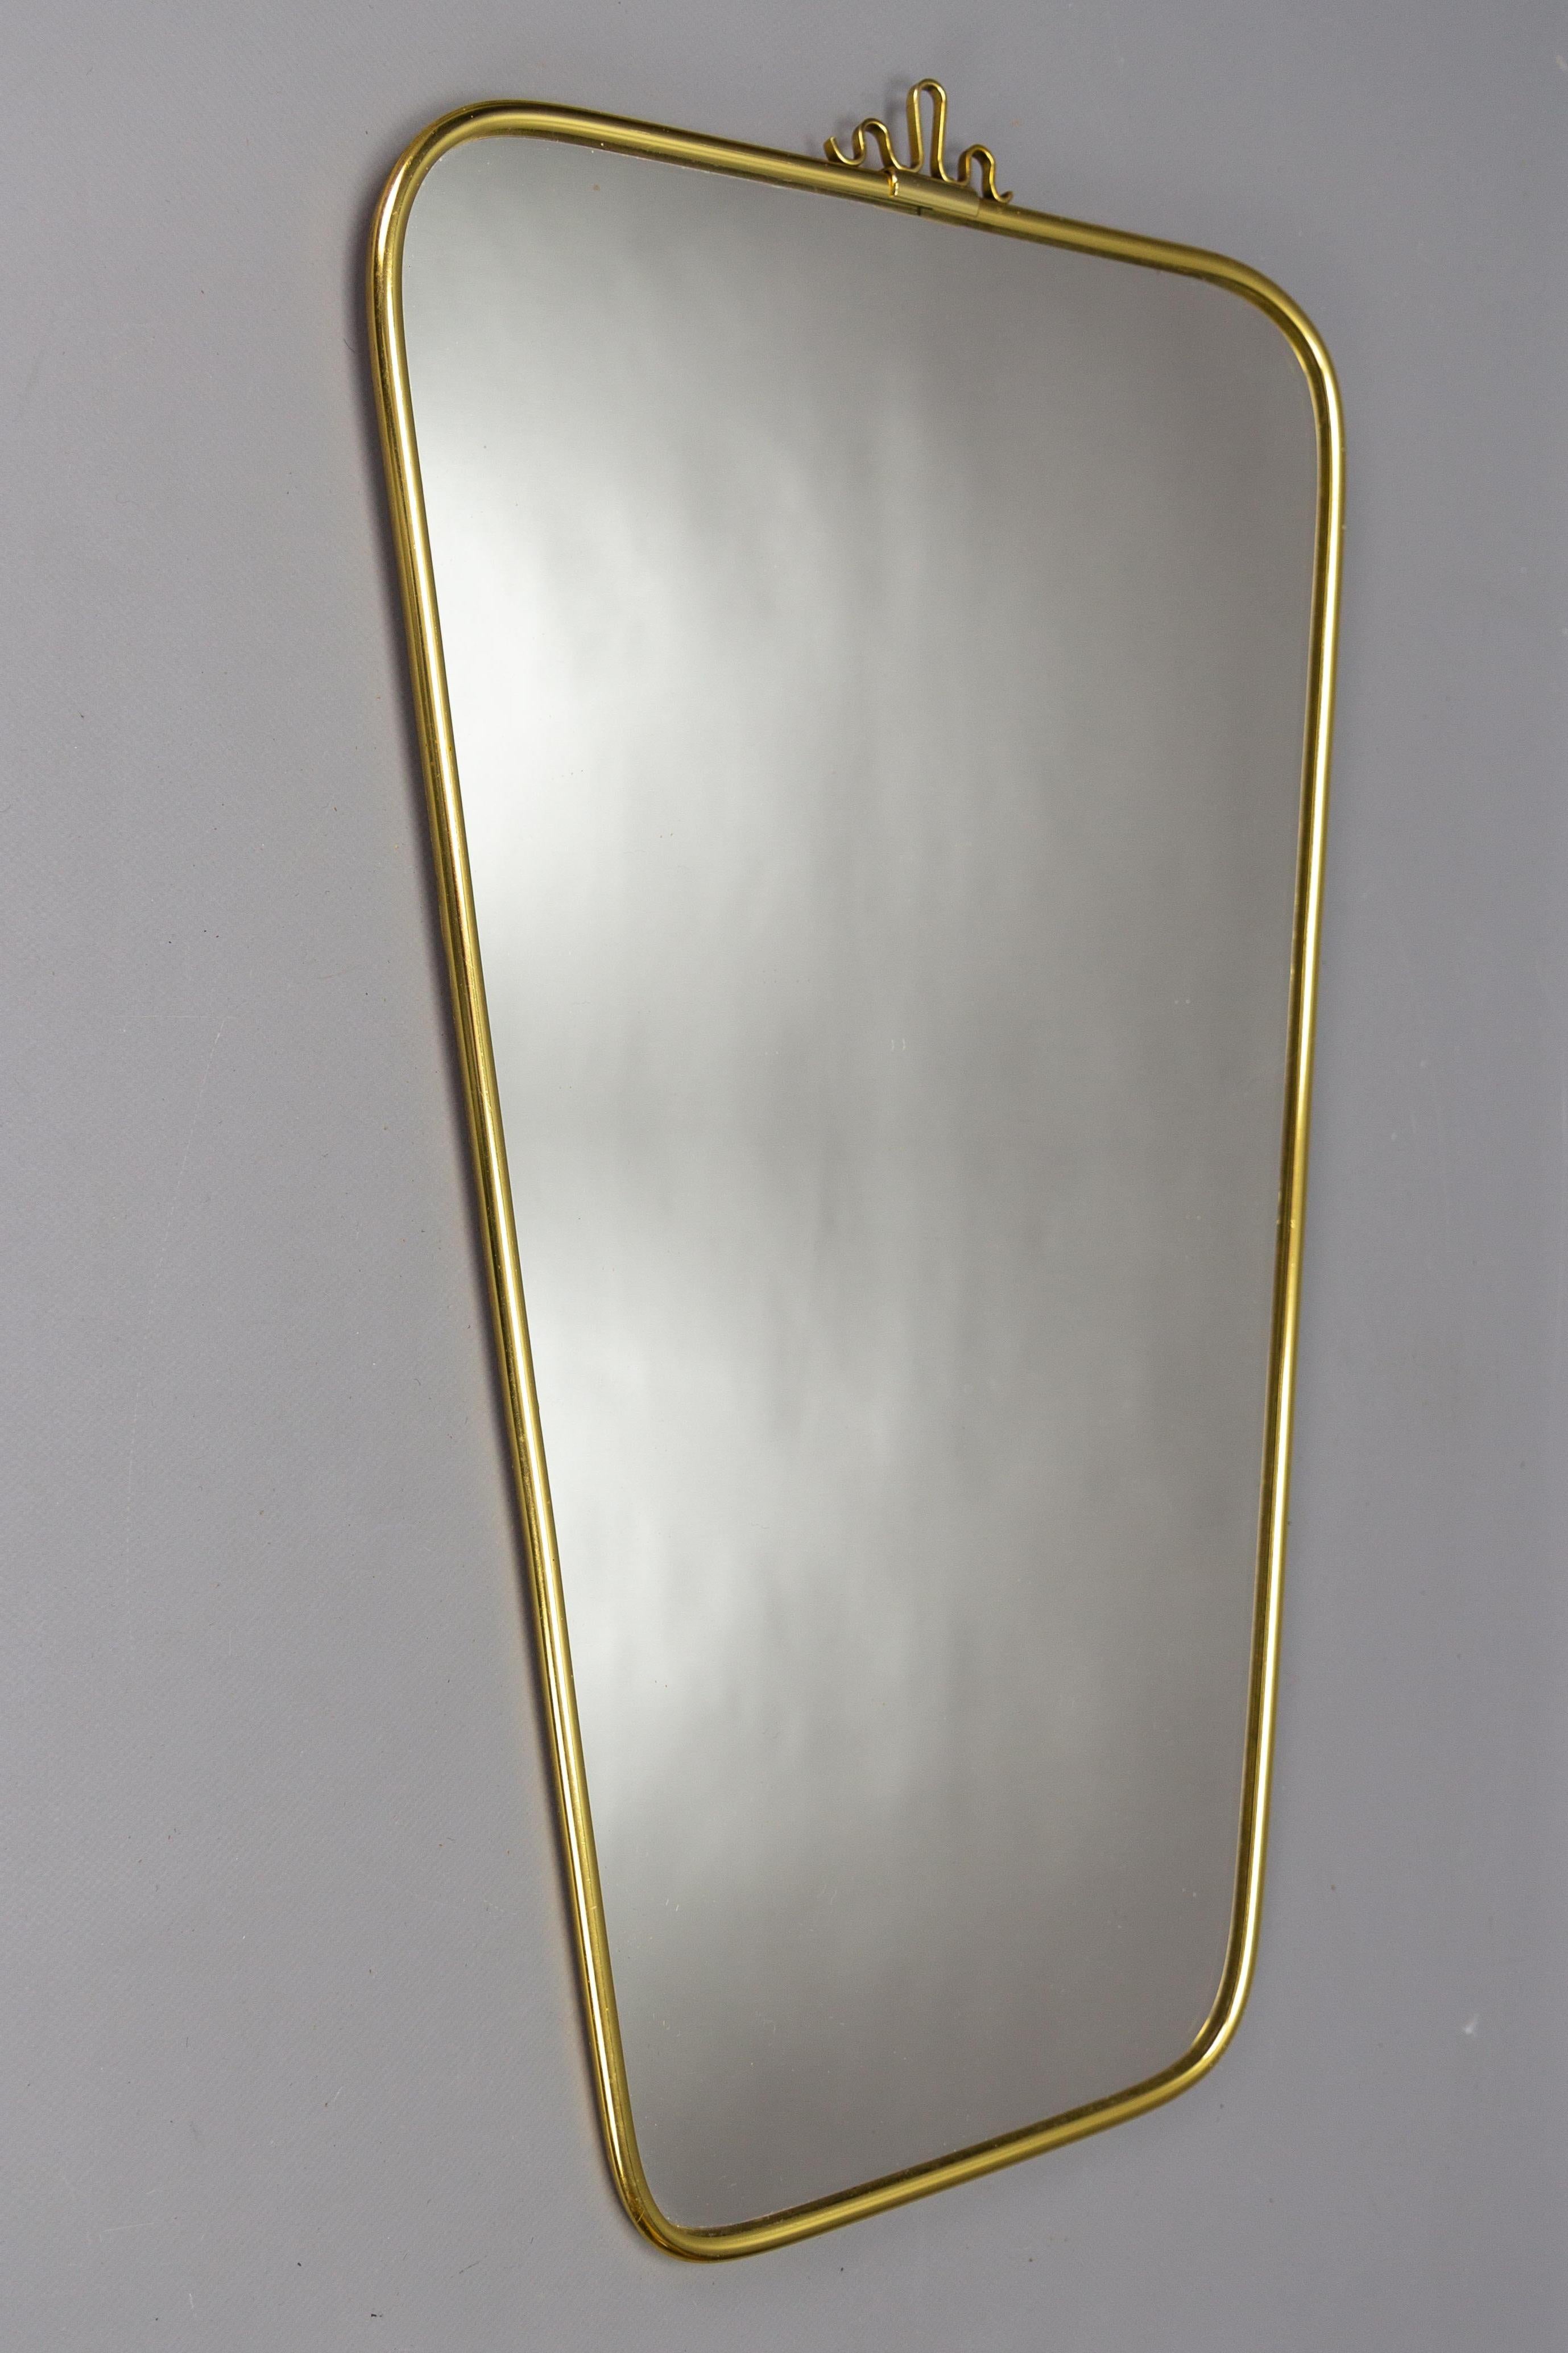 German Mid-Century Modern brass frame wall mirror by Lenzgold, from 1964.
An elegant Mid-Century Modern design wall mirror by Lenzgold, Germany, model #338. Brass frame, topped with a stylized brass crown.
The mirror has the Lenz sticker with a